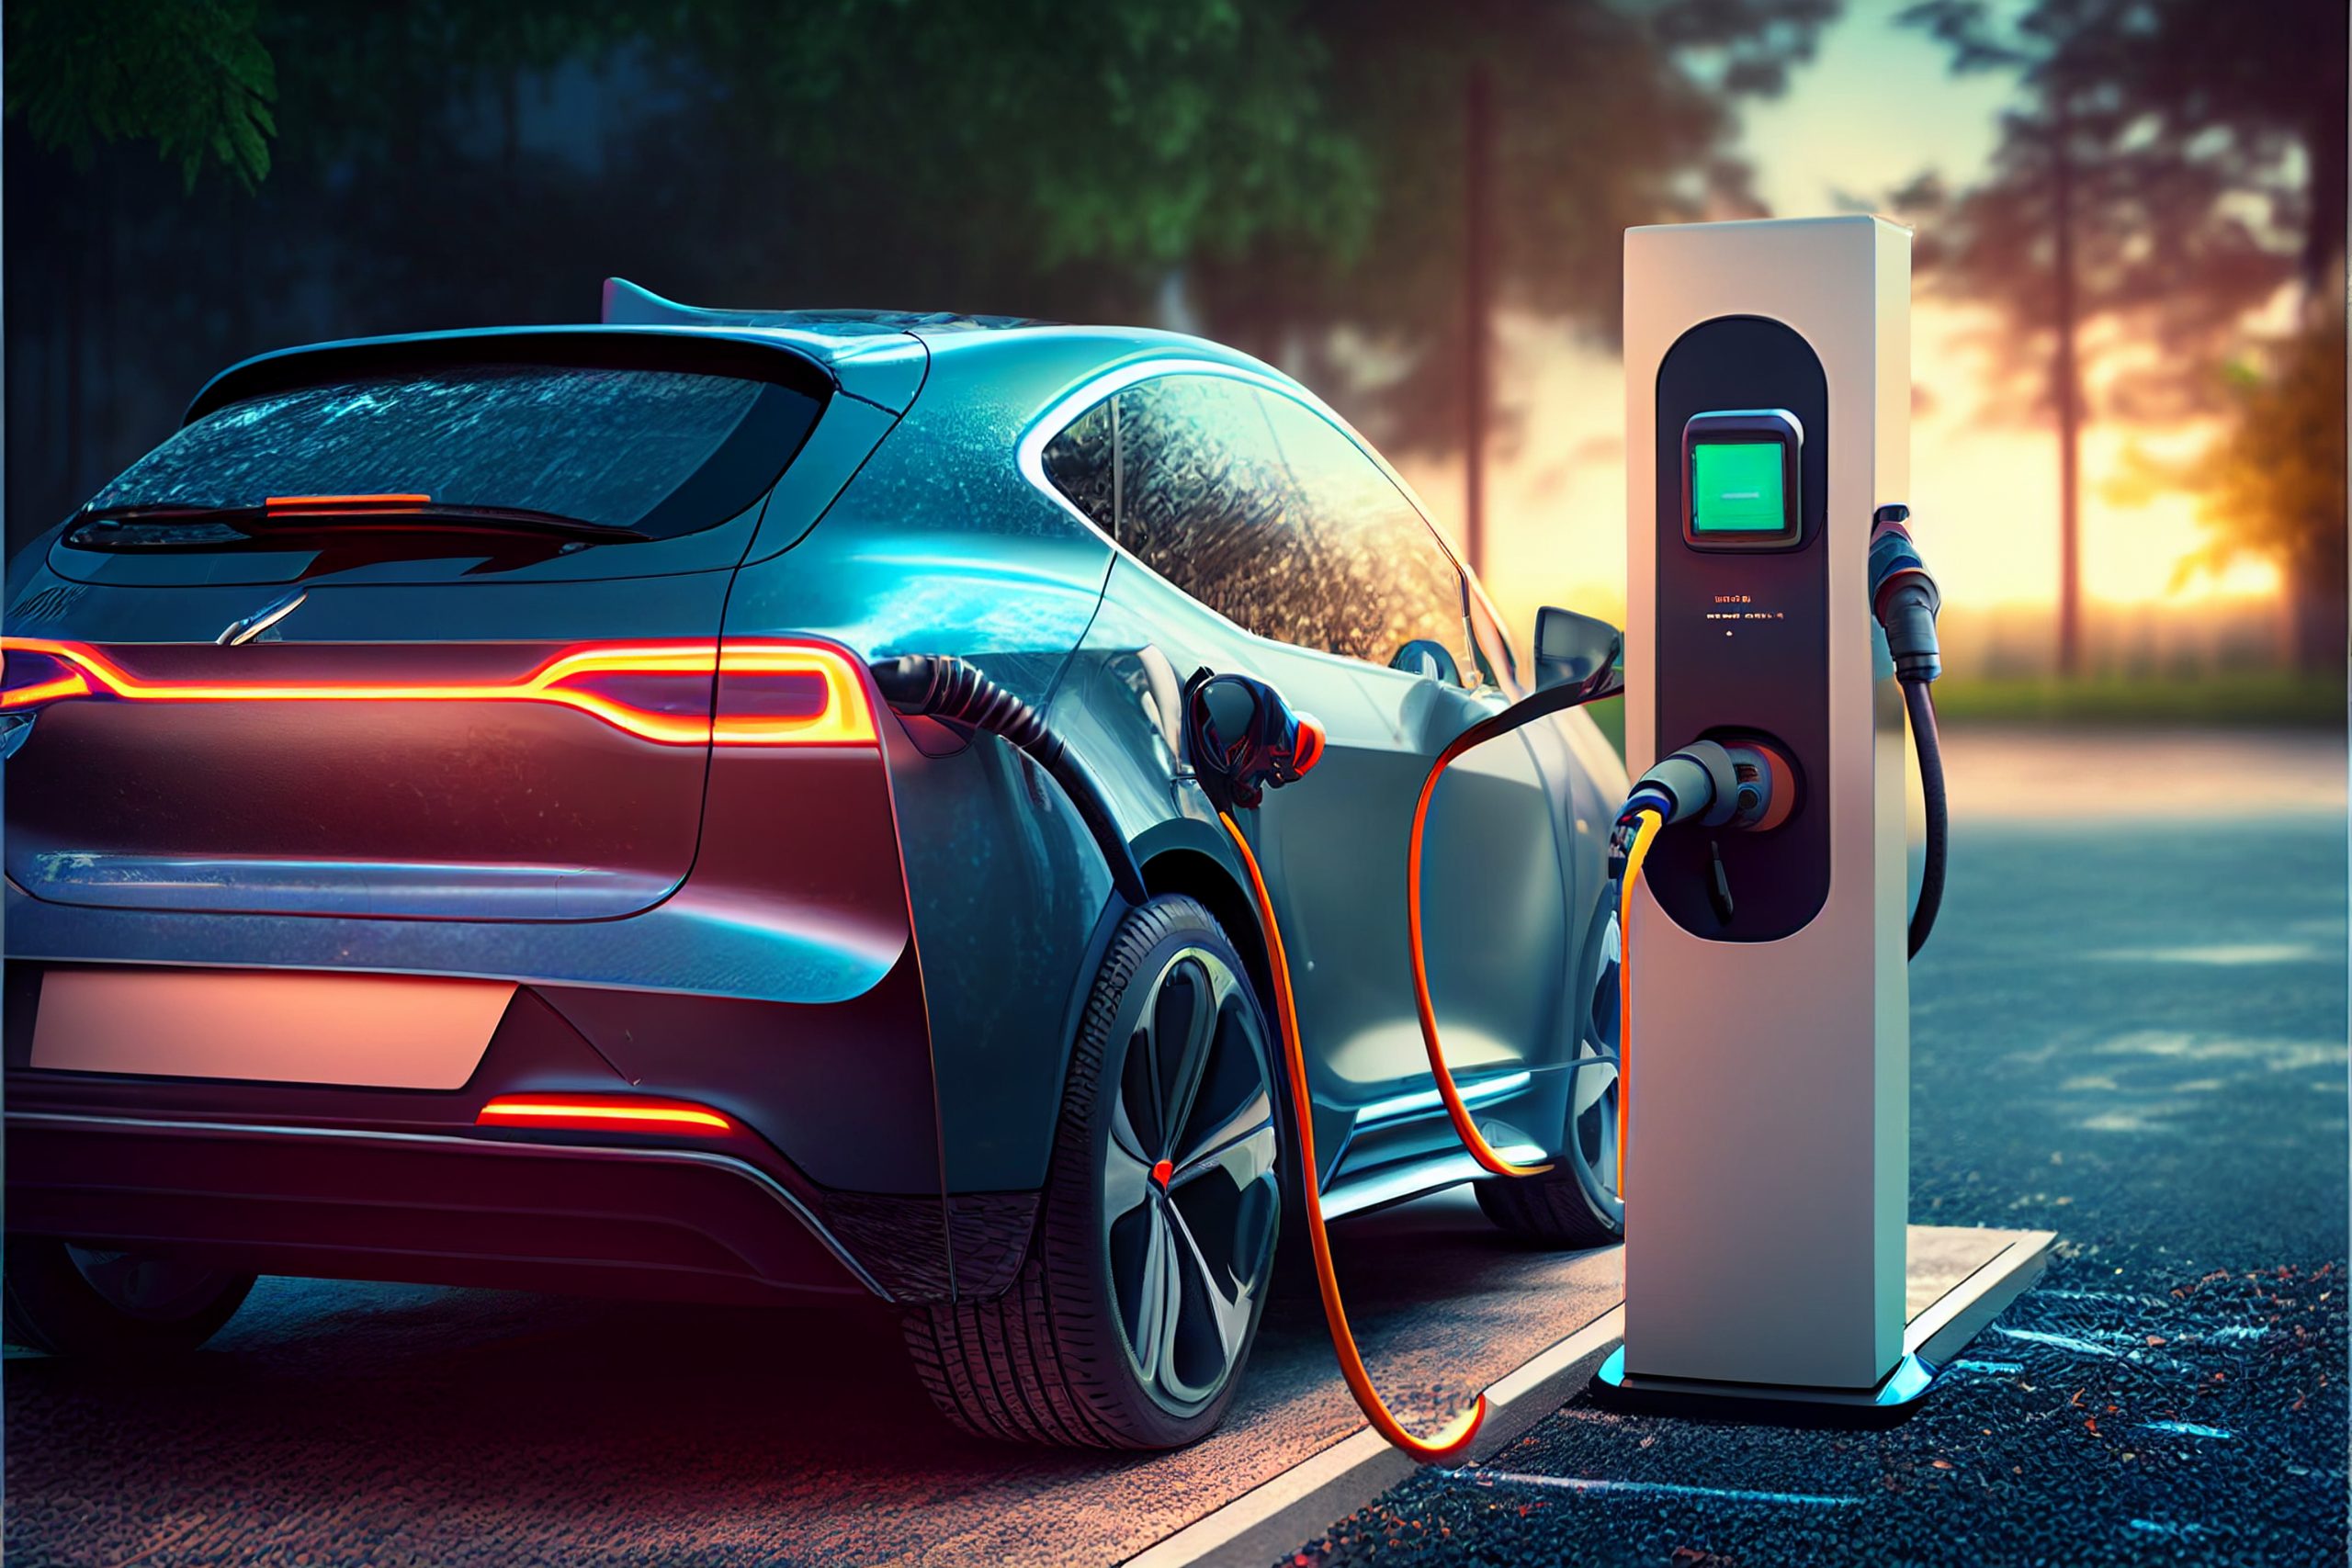 Featured image for “Is the U.S. Ready for the EV Rollout?”